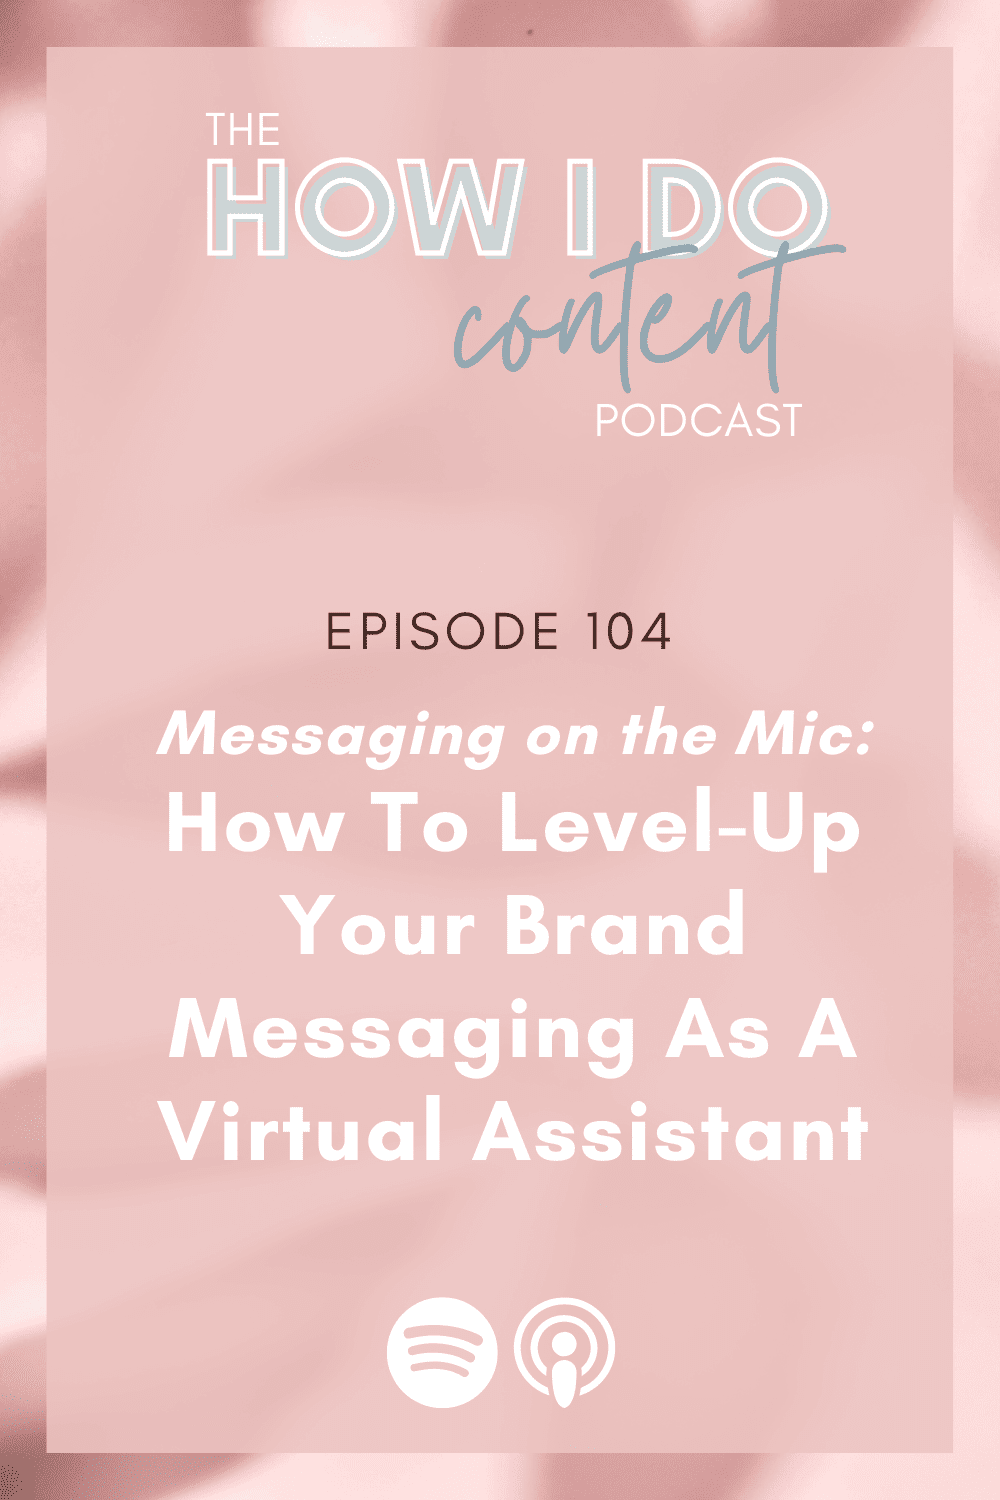 How To Level-Up Your Brand Messaging As A Virtual Assistant